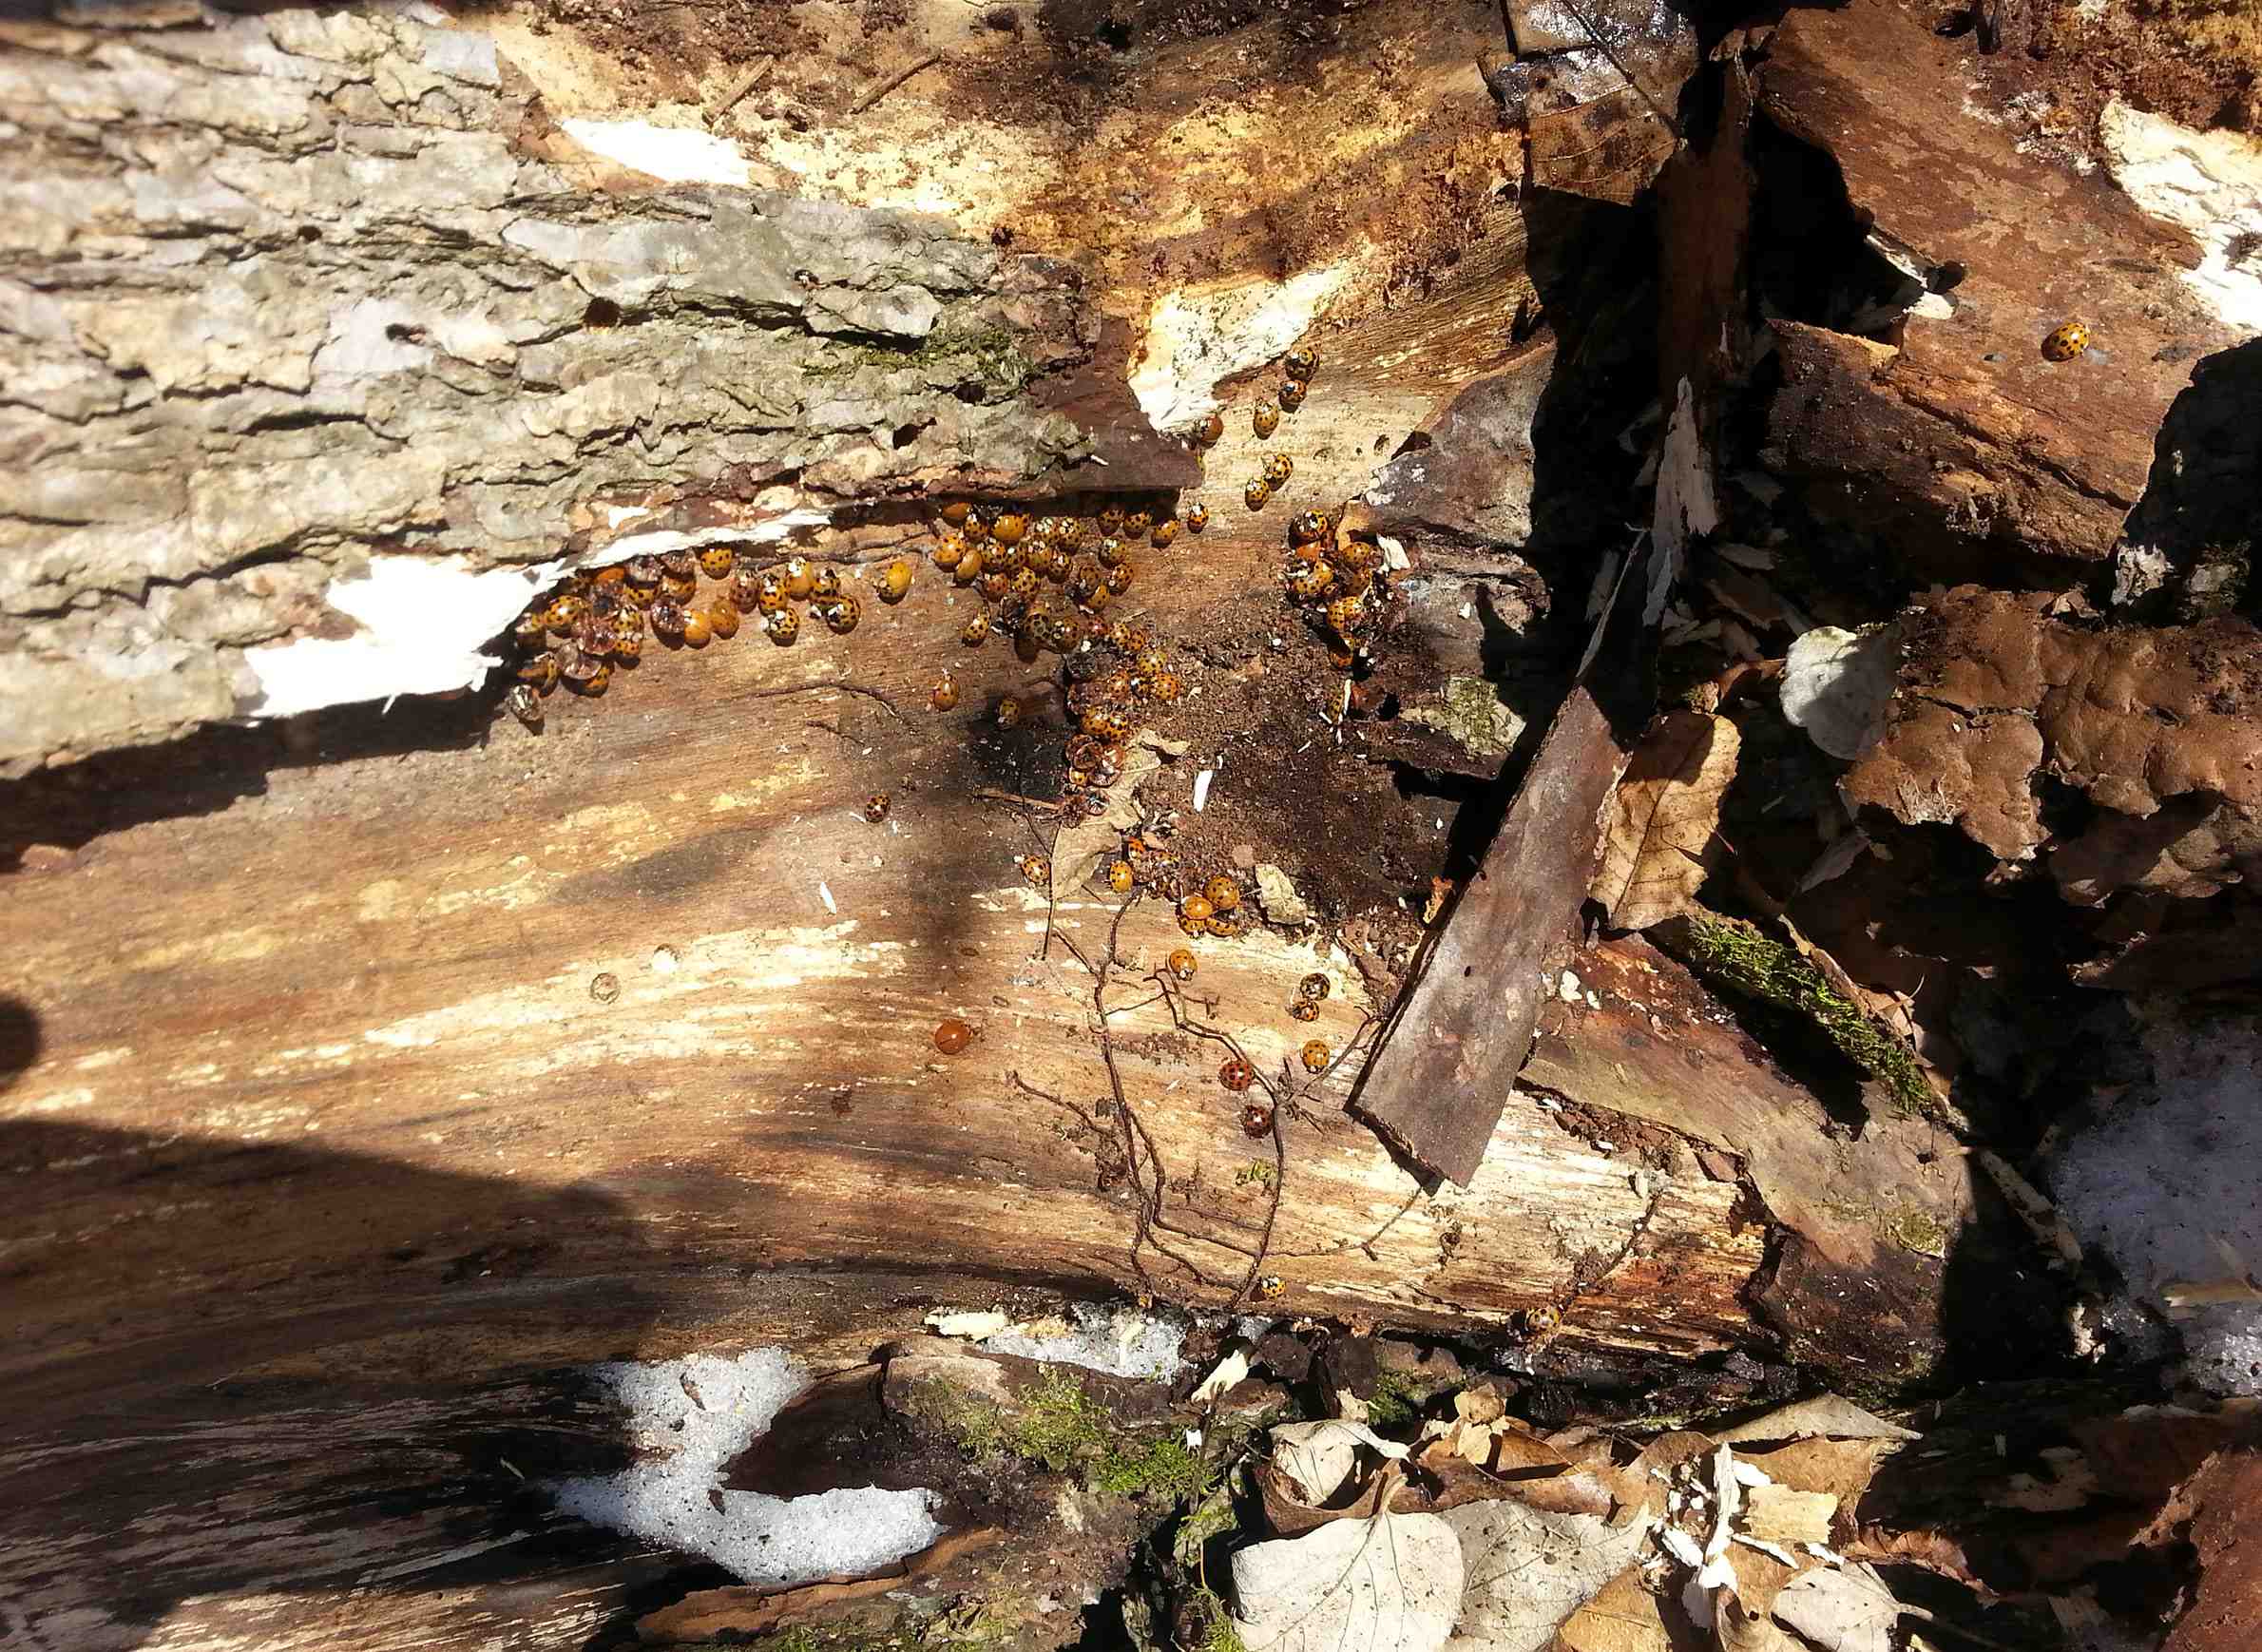 Multicolored Asian lady beetles can find shelter in bark and leaf litter during winter.